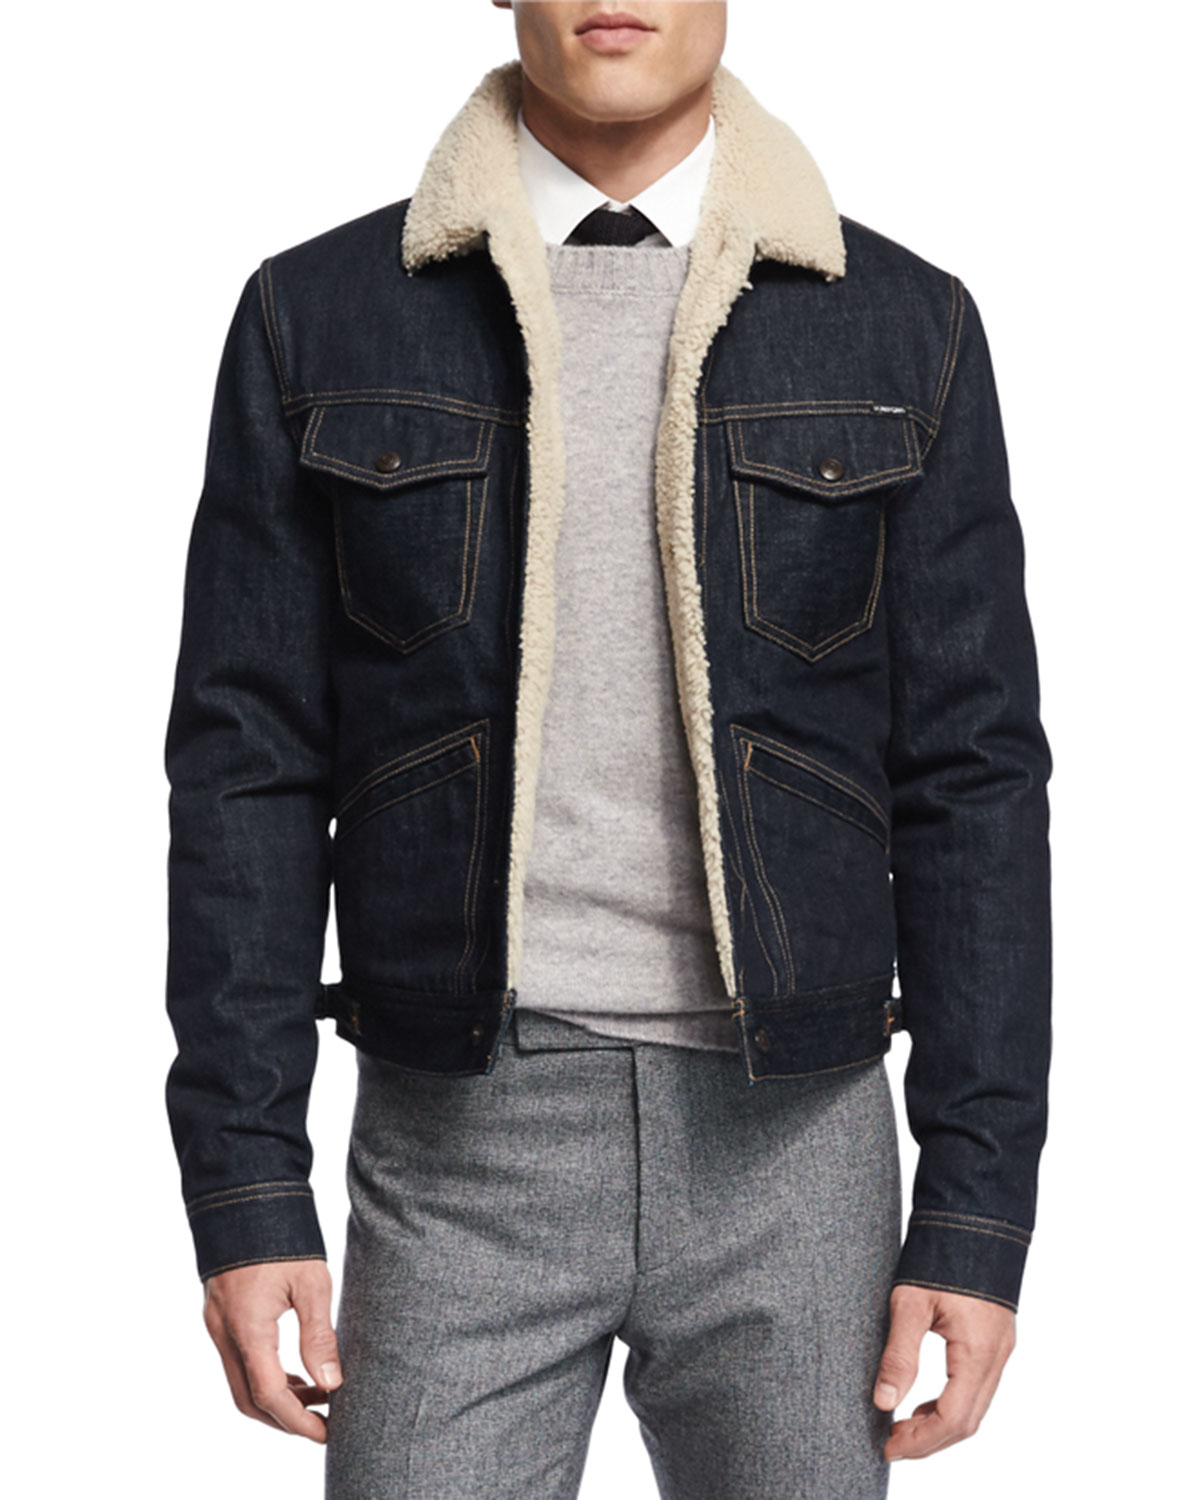 Tom Ford Denim Jacket With Shearling Lining in Blue for Men - Lyst